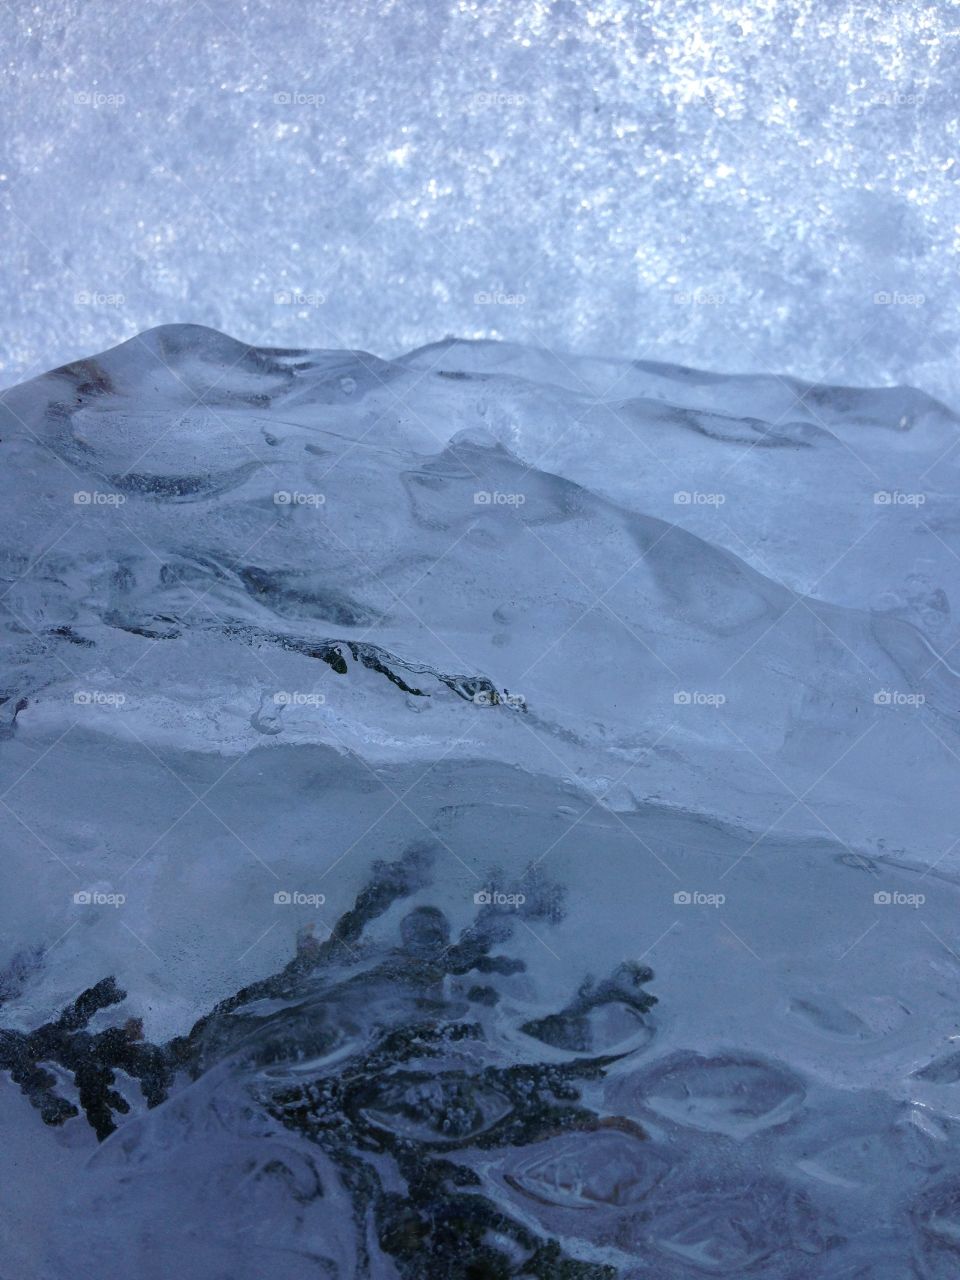 Jagged ice sculpture from cool crisp waters.